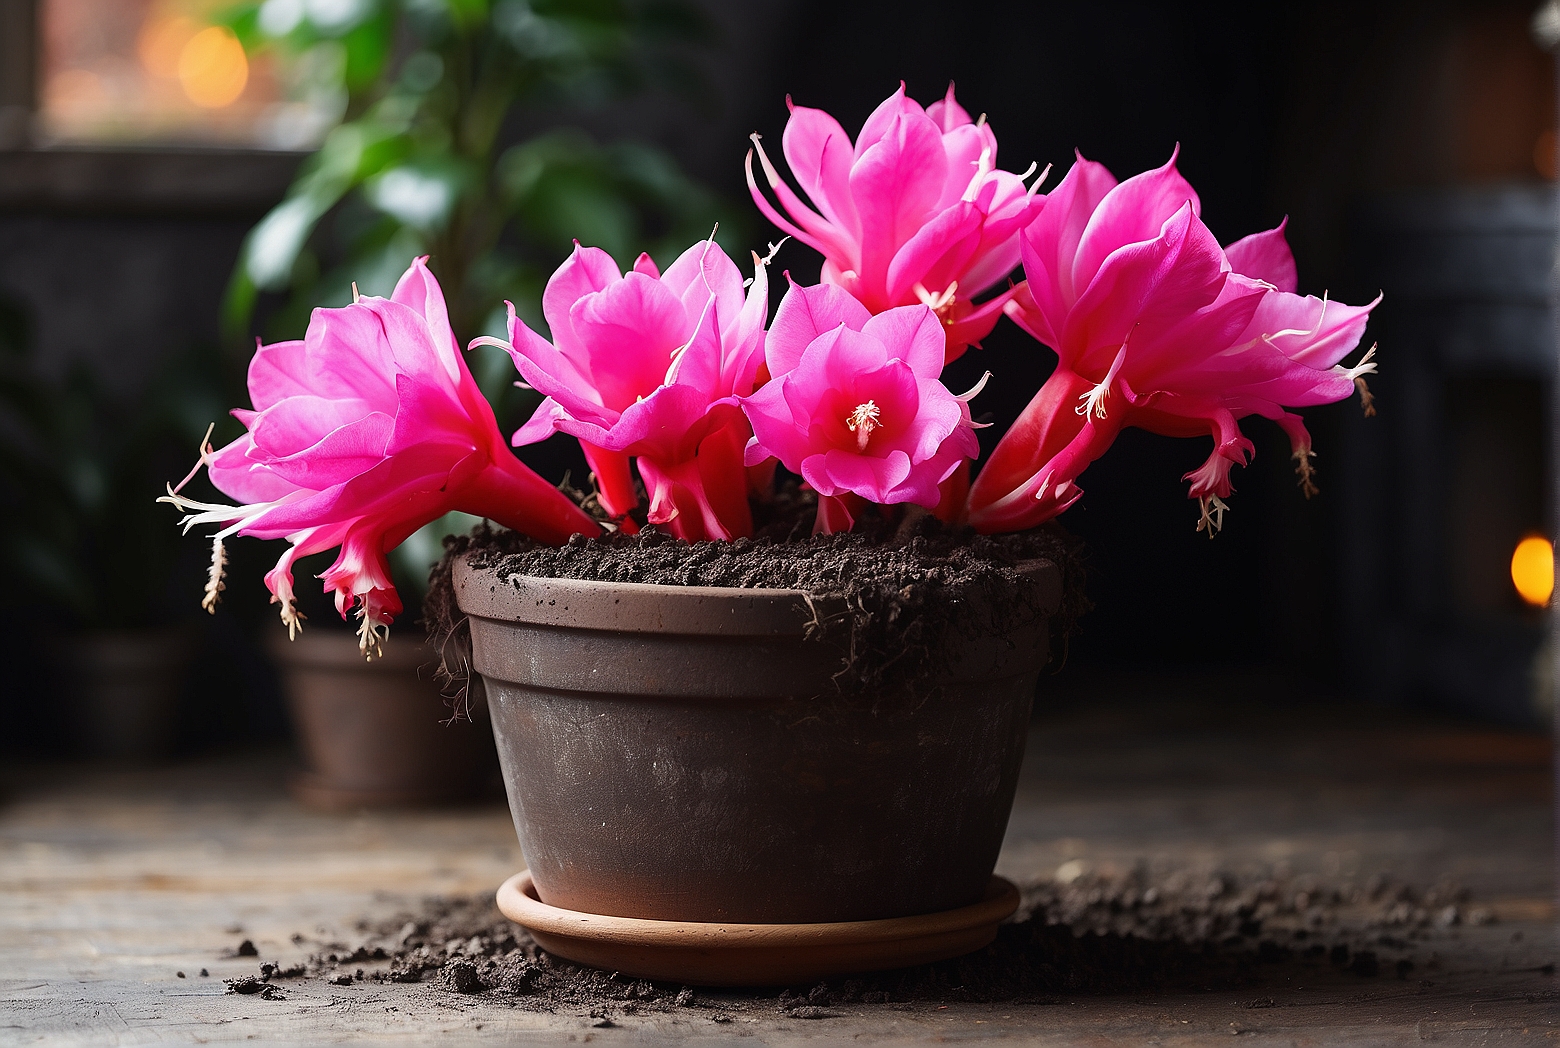 Can you use regular potting soil for your Christmas cactus?